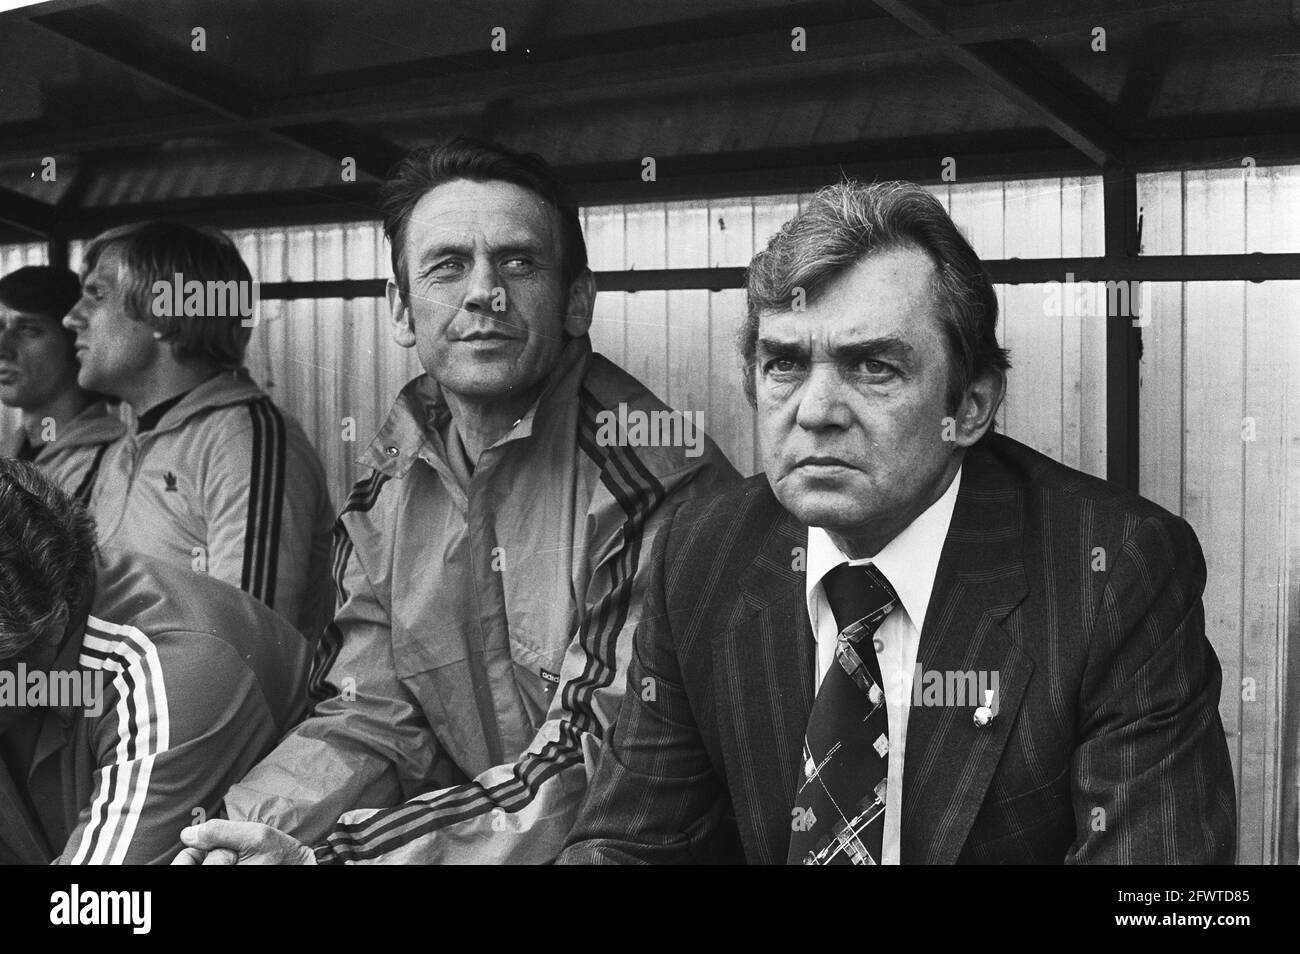 Practice match FC Brugge against Dutch national team 1-3; trainers Zwartkruis (l) and Happel in the dugout, May 13, 1978, TRAINERS, sports, soccer, The Netherlands, 20th century press agency photo, news to remember, documentary, historic photography 1945-1990, visual stories, human history of the Twentieth Century, capturing moments in time Stock Photo